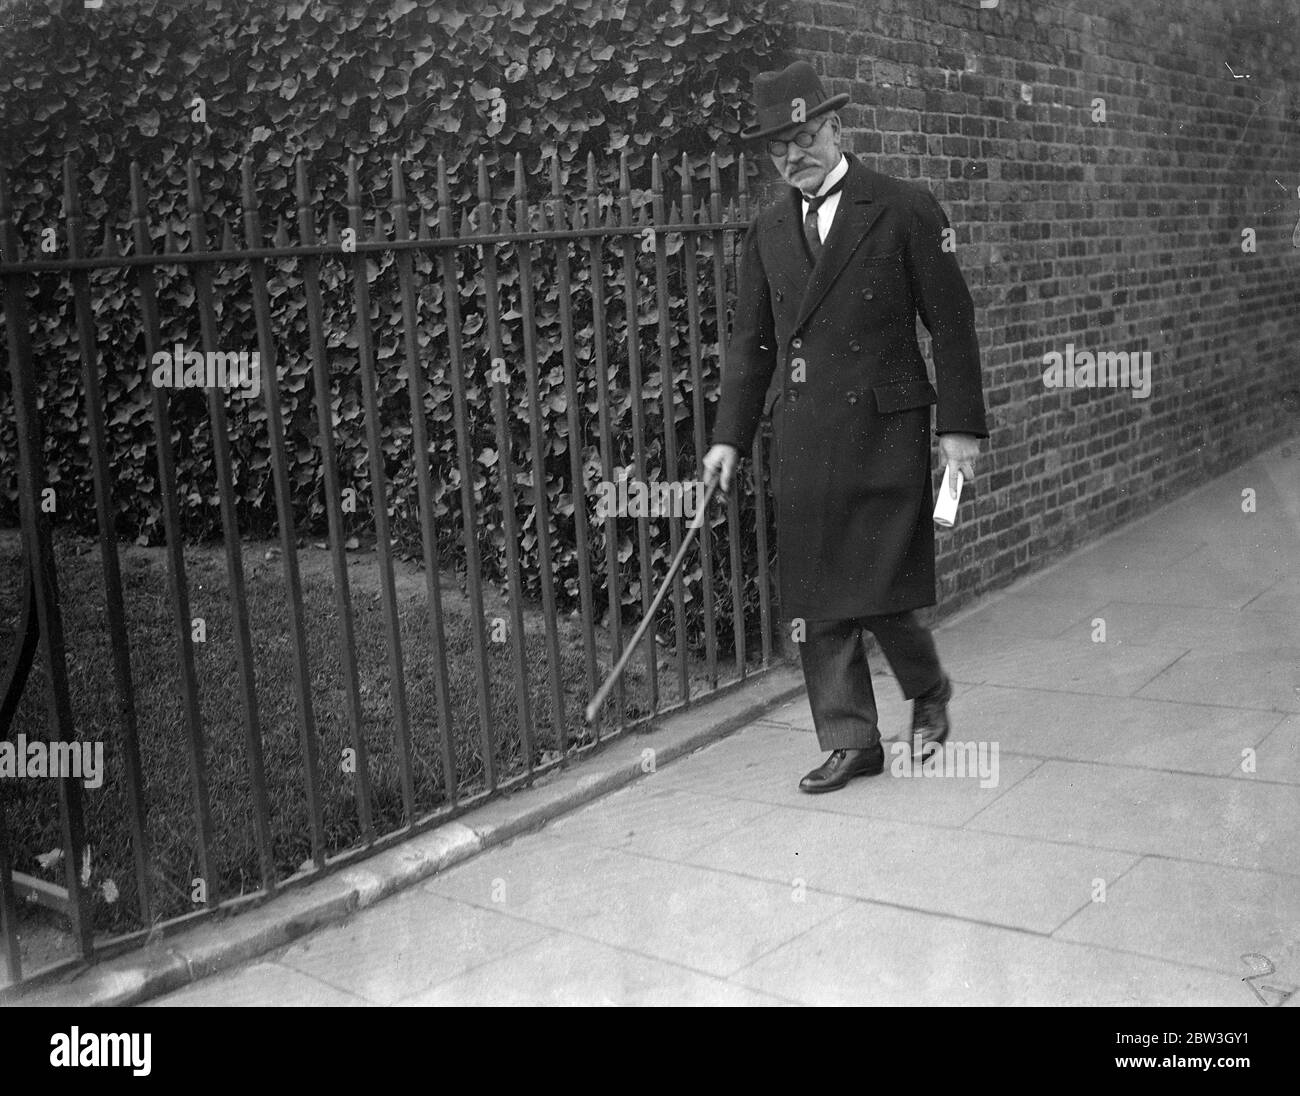 Mr Ramsay macdonald leaves after League Council meeting . Delegates left St James ' Palace after the League Council had met to hear Germany ' s case for reoccupation of the Rhineland put by Herr von Ribbentrop , chief German delegate . Photo shows , Mr Ramsay Macdonald leaving after the meeting . 19 March 1936 Stock Photo